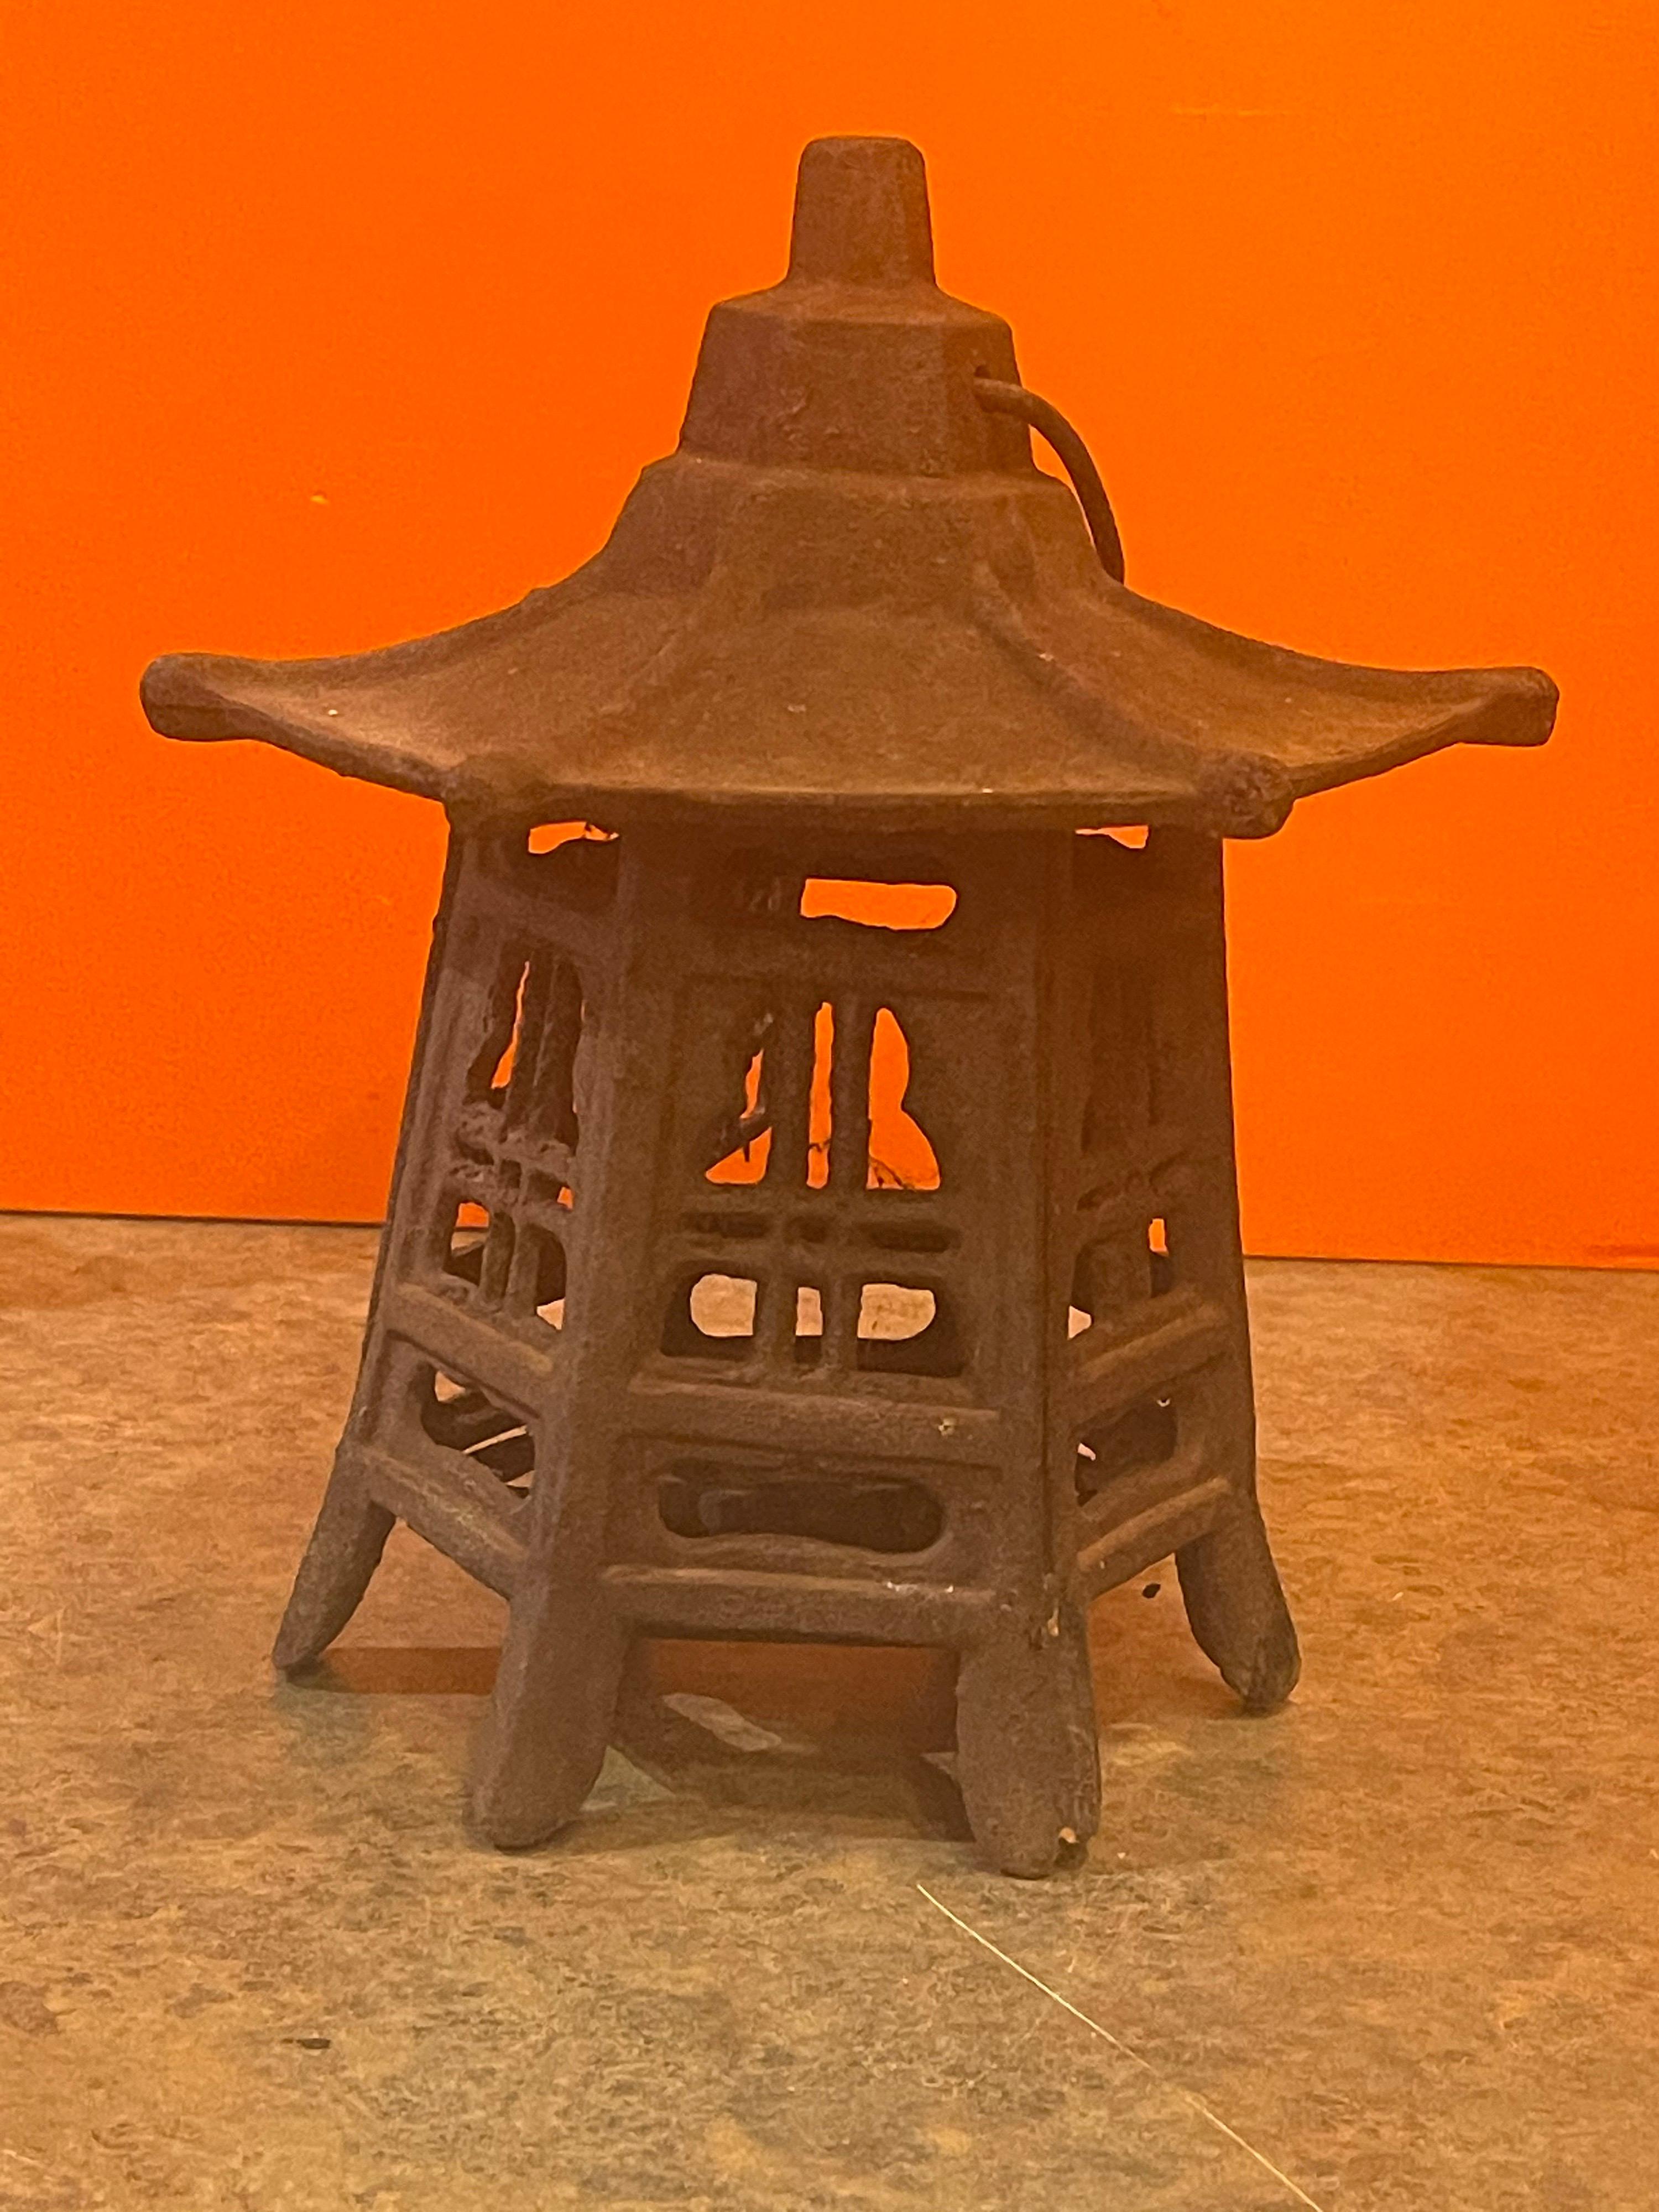 Vintage distressed cast iron Japanese pagoda lantern, circa 1950s. The lantern has a great distressed rust patina and a wonderful look. The piece is solid and functional and has a small door that opens to allow a candle to be inserted. The pagoda is